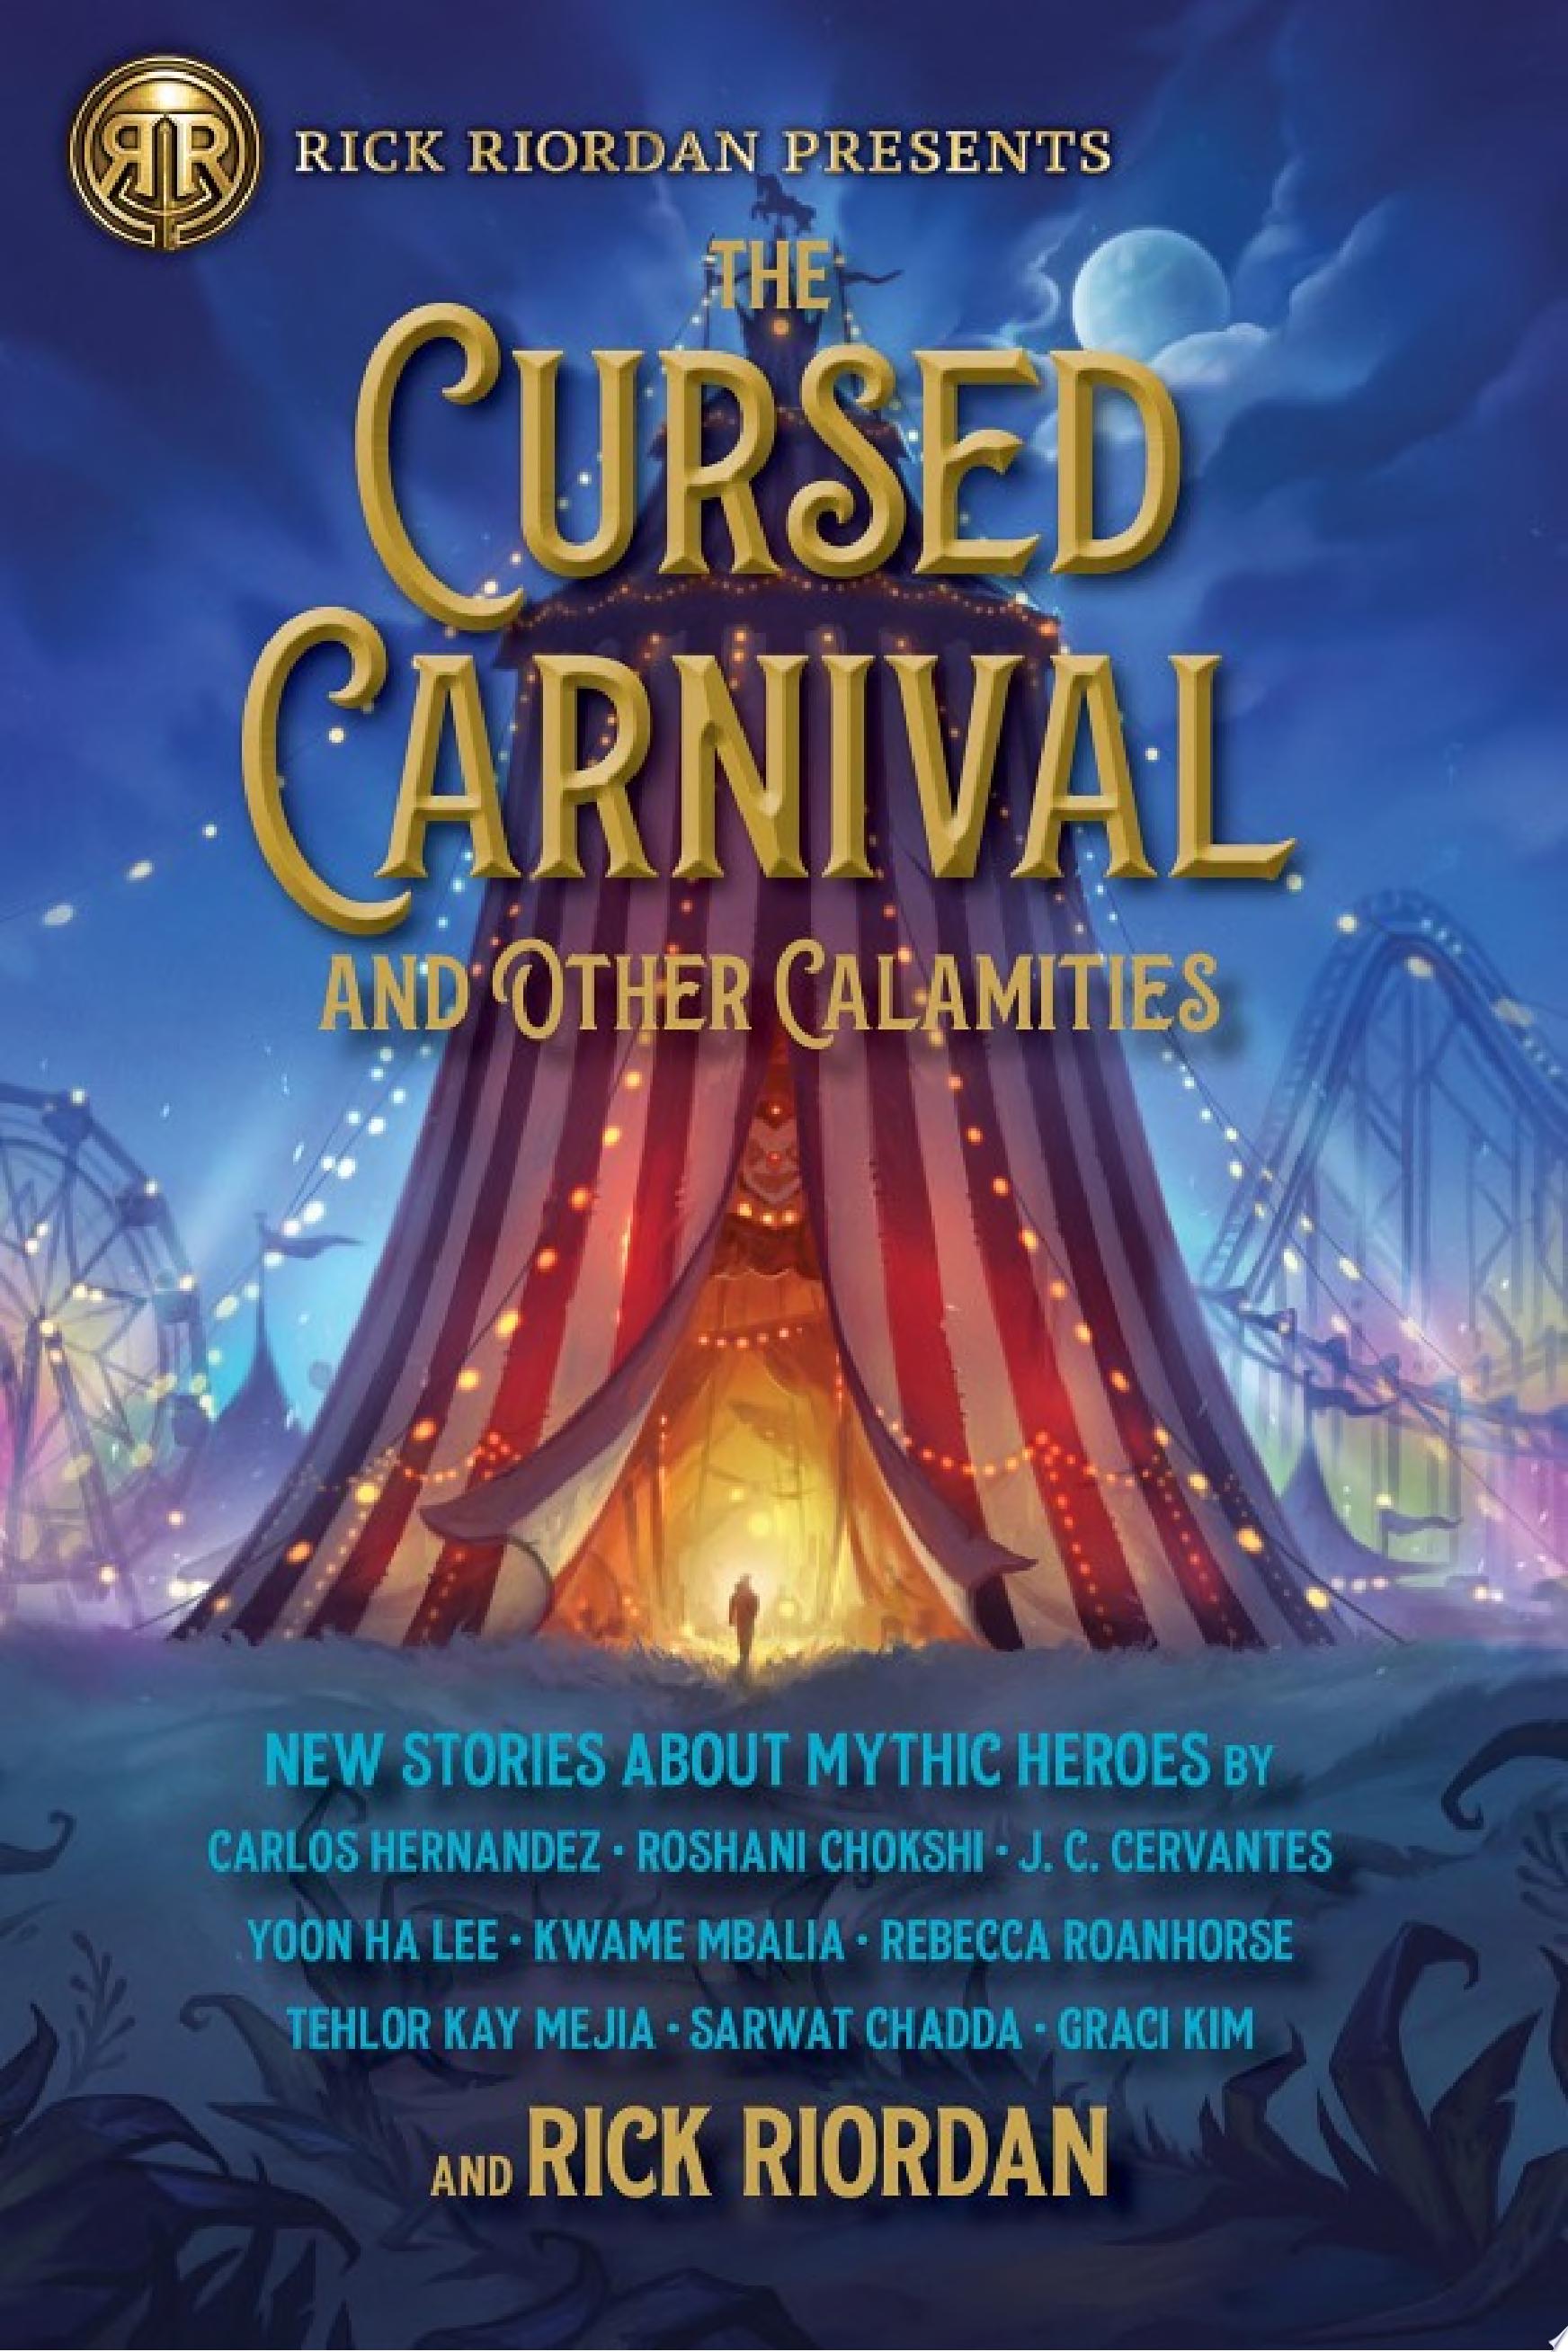 Image for "The Cursed Carnival and Other Calamities"